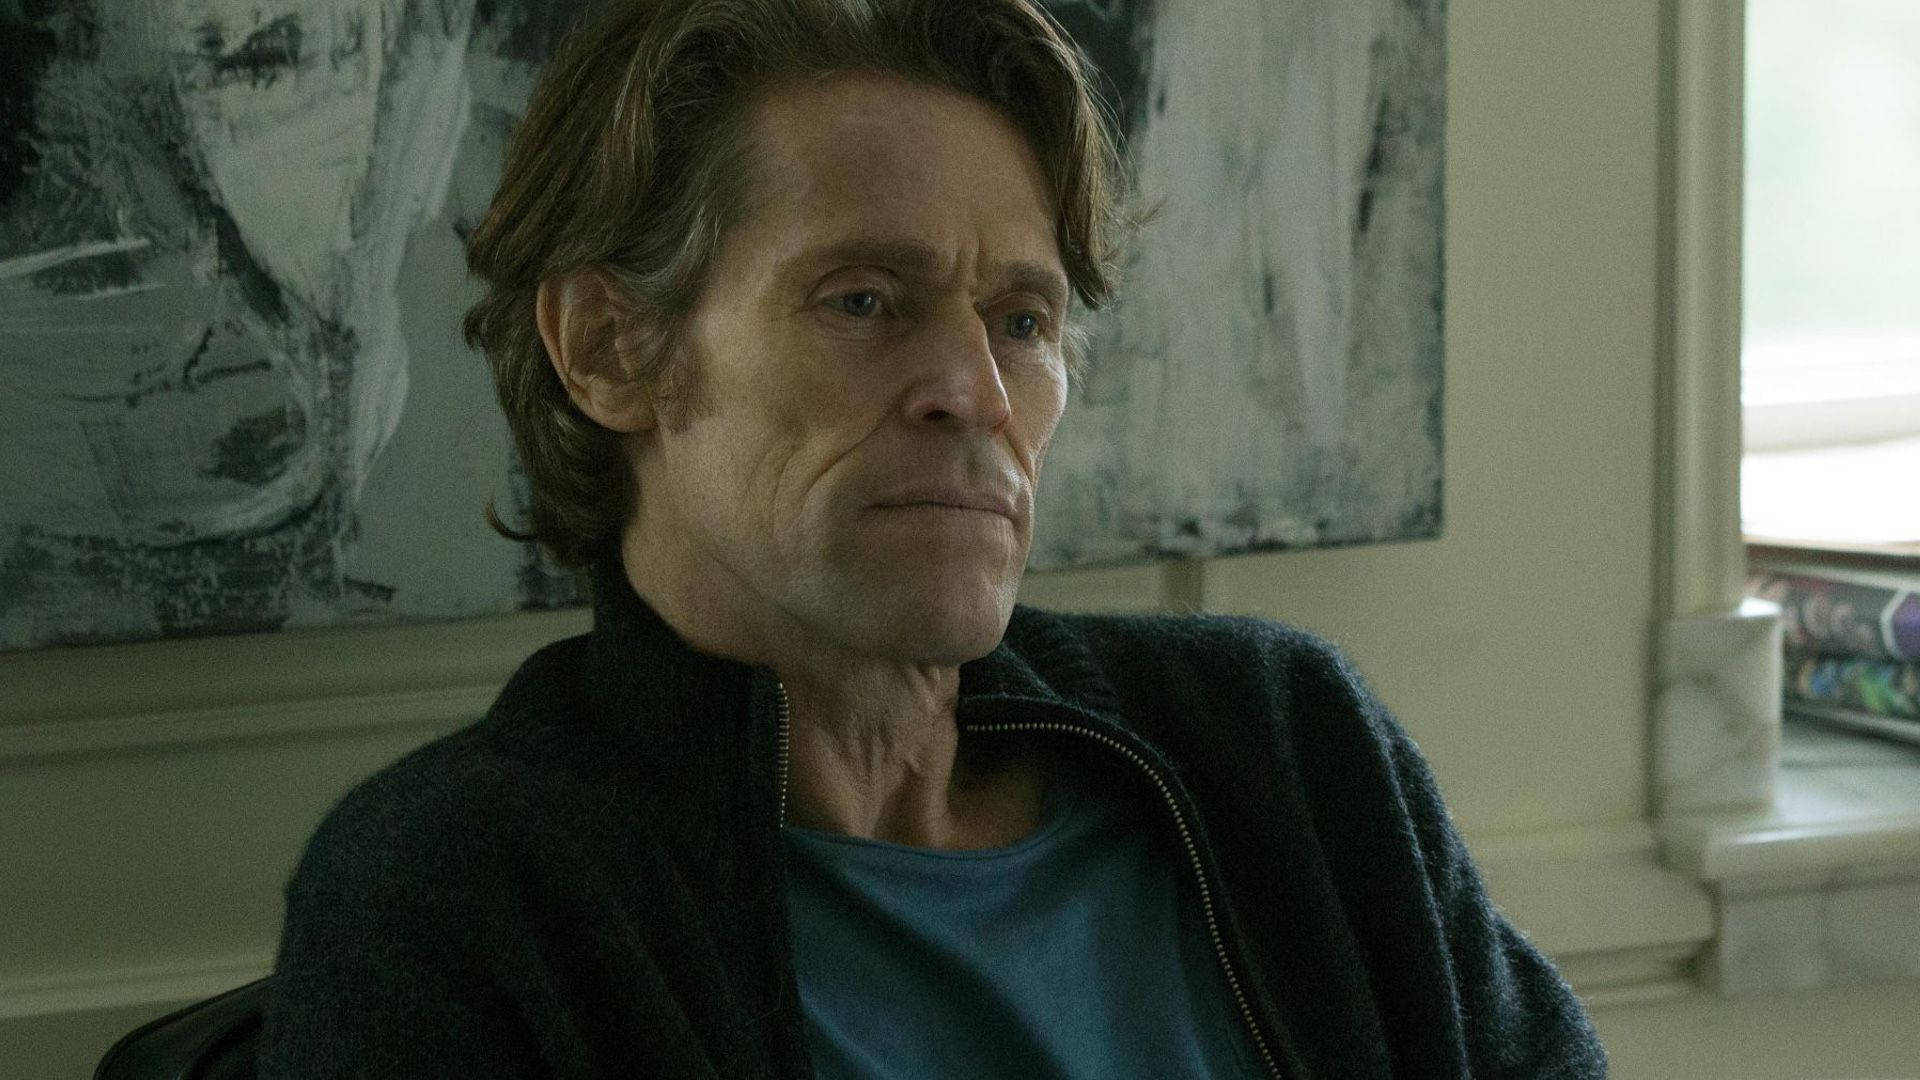 Acclaimed Actor Willem Dafoe In A Thought-provoking Pose